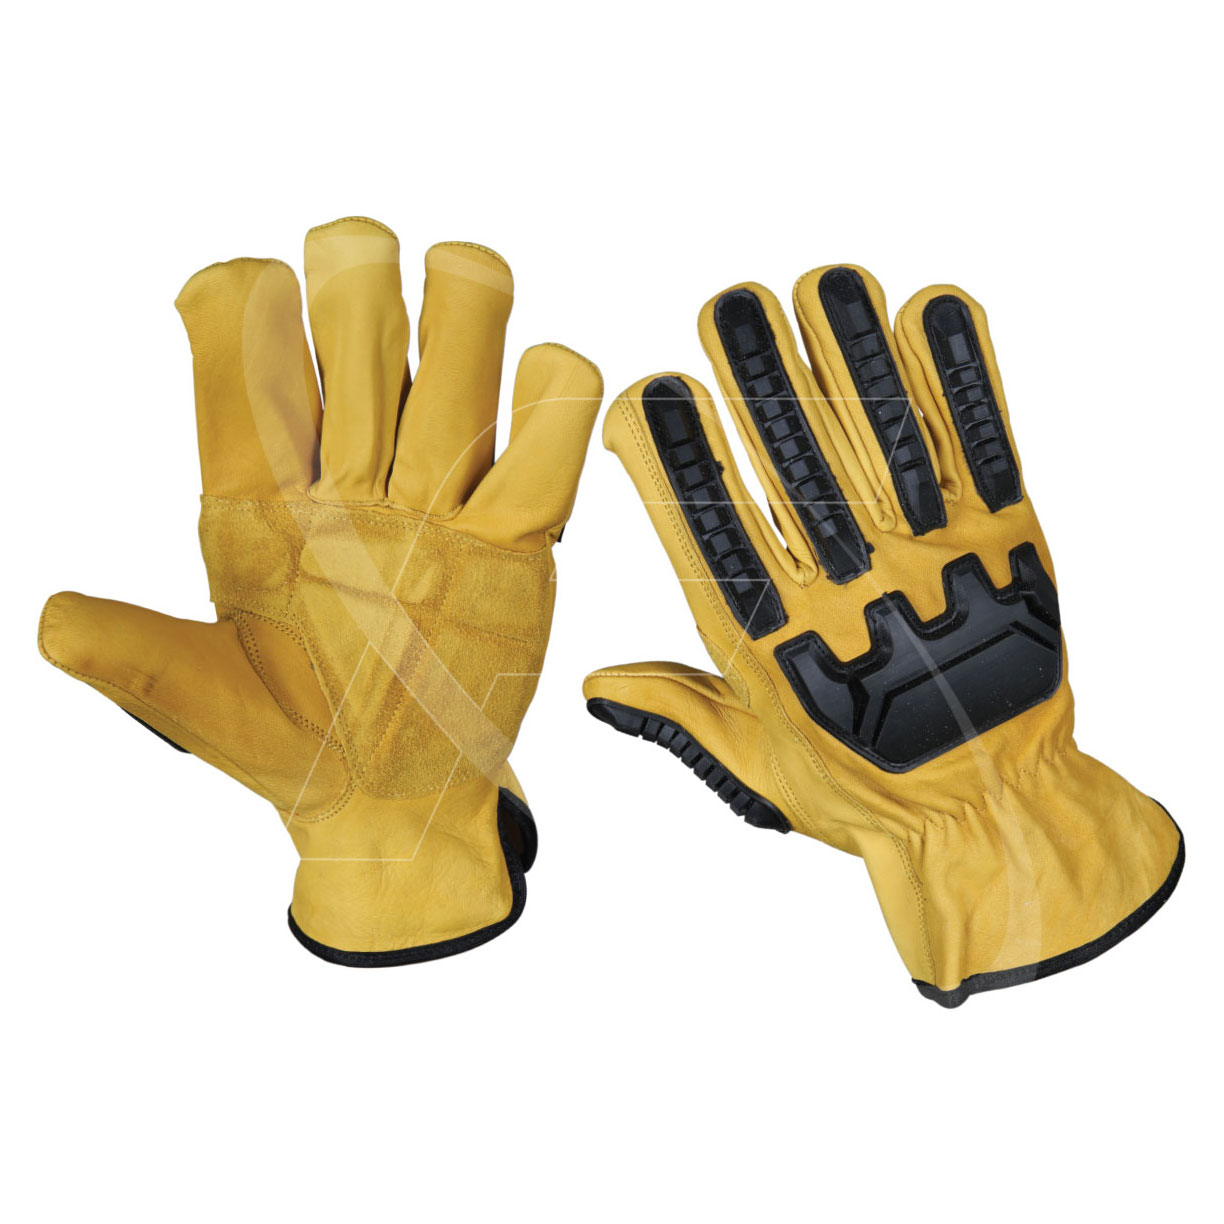 Impact Safety Gloves in Cowhide Leather Cheap Leather Working Gloves Impact TPR Gloves